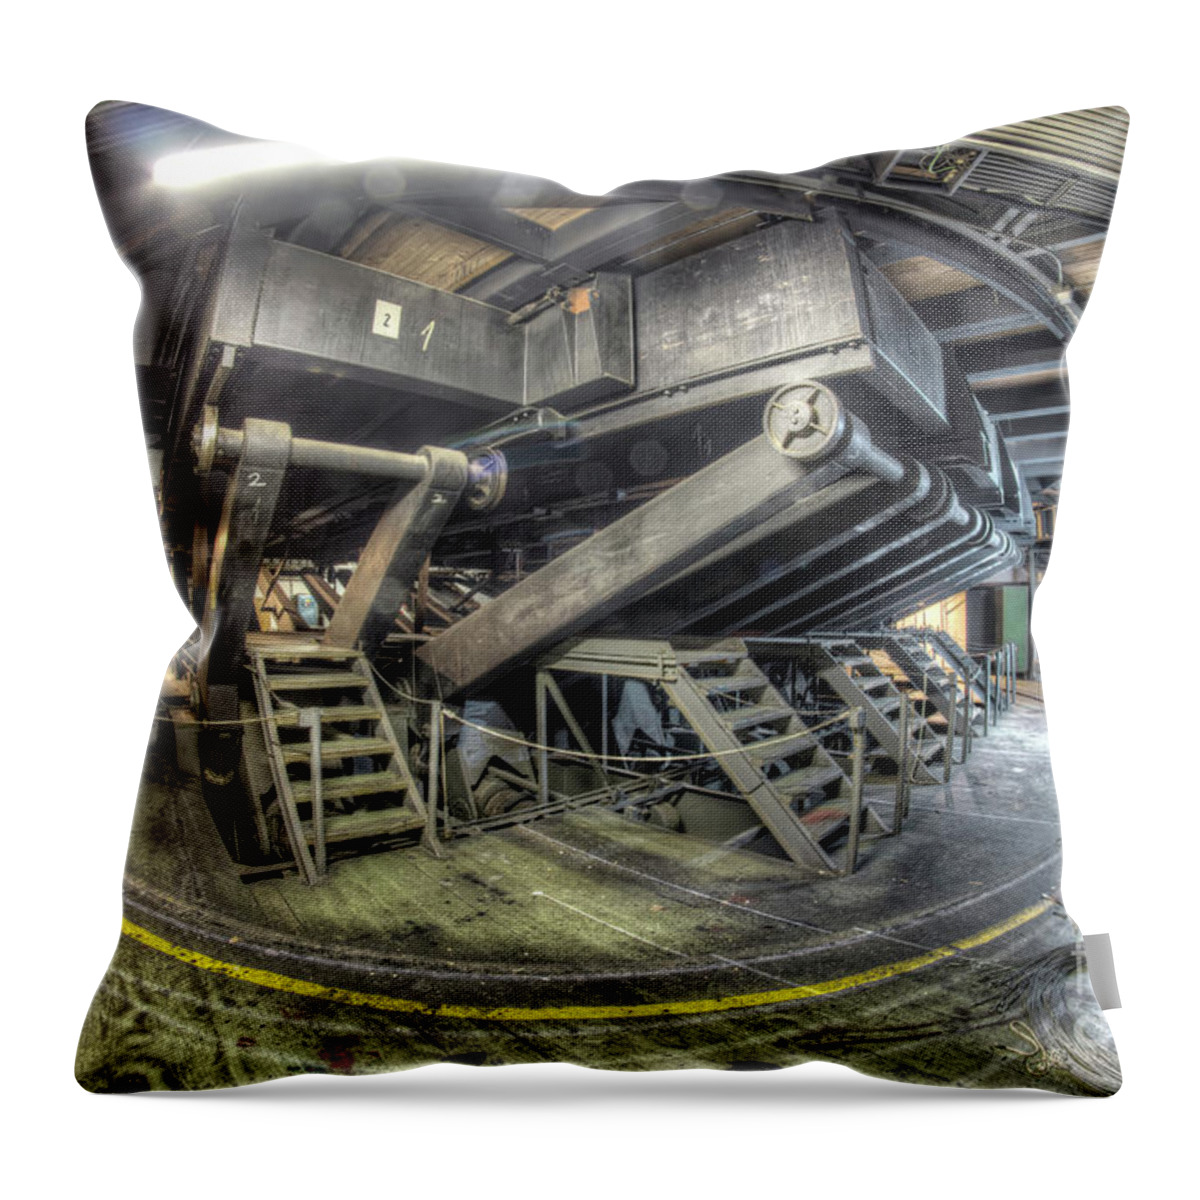 Theatre Throw Pillow featuring the photograph Below the stage turntable by Michal Boubin